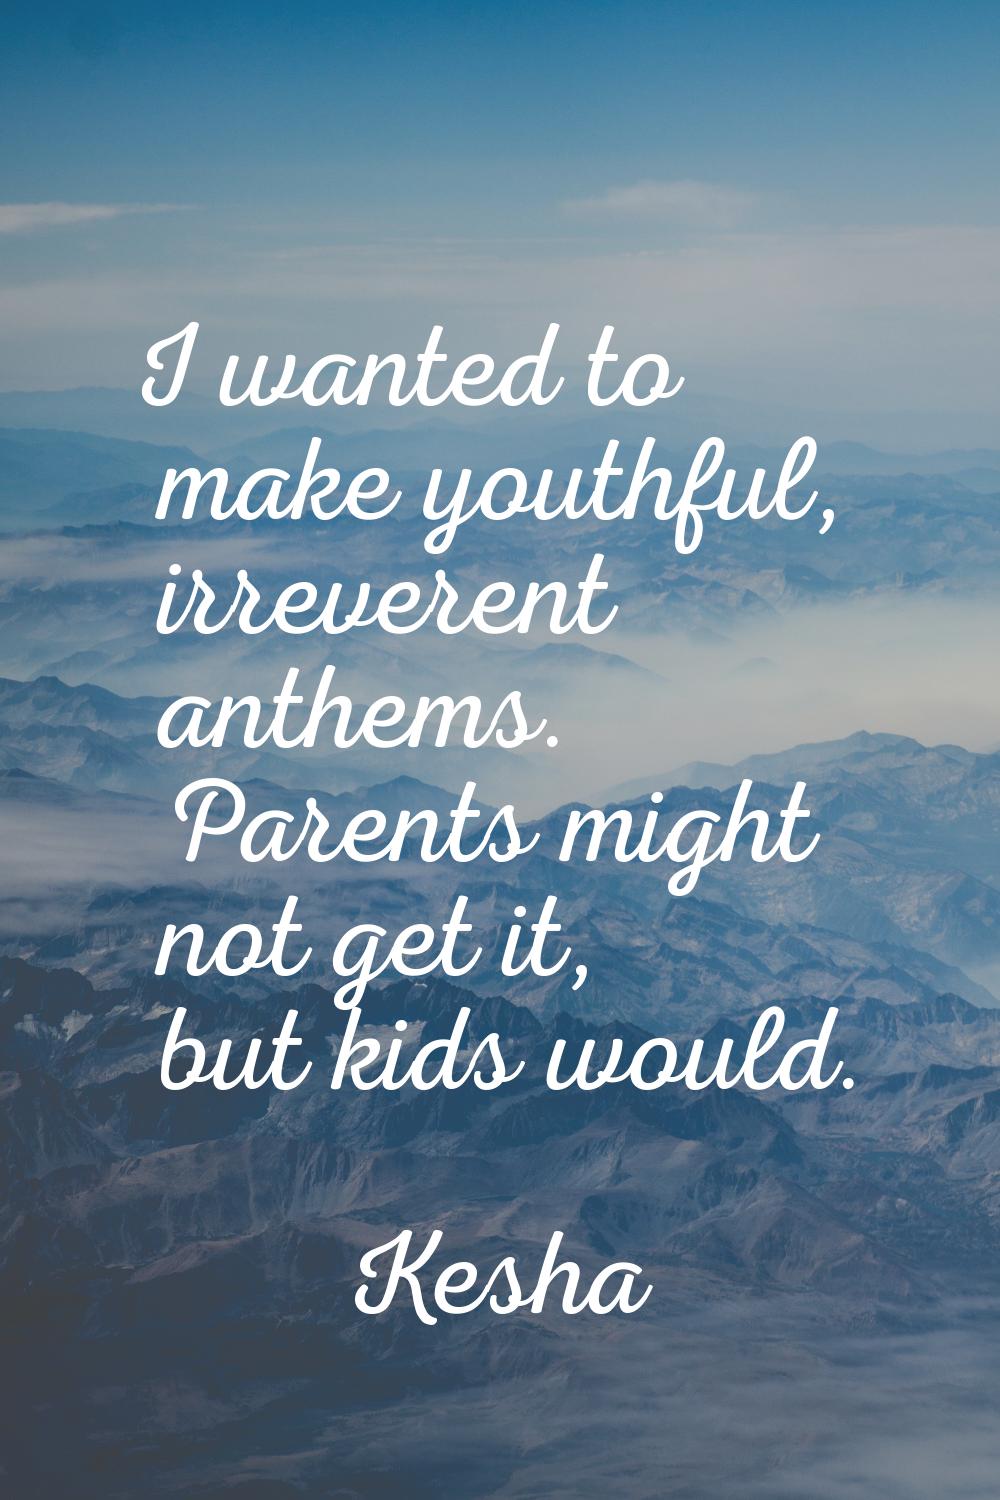 I wanted to make youthful, irreverent anthems. Parents might not get it, but kids would.